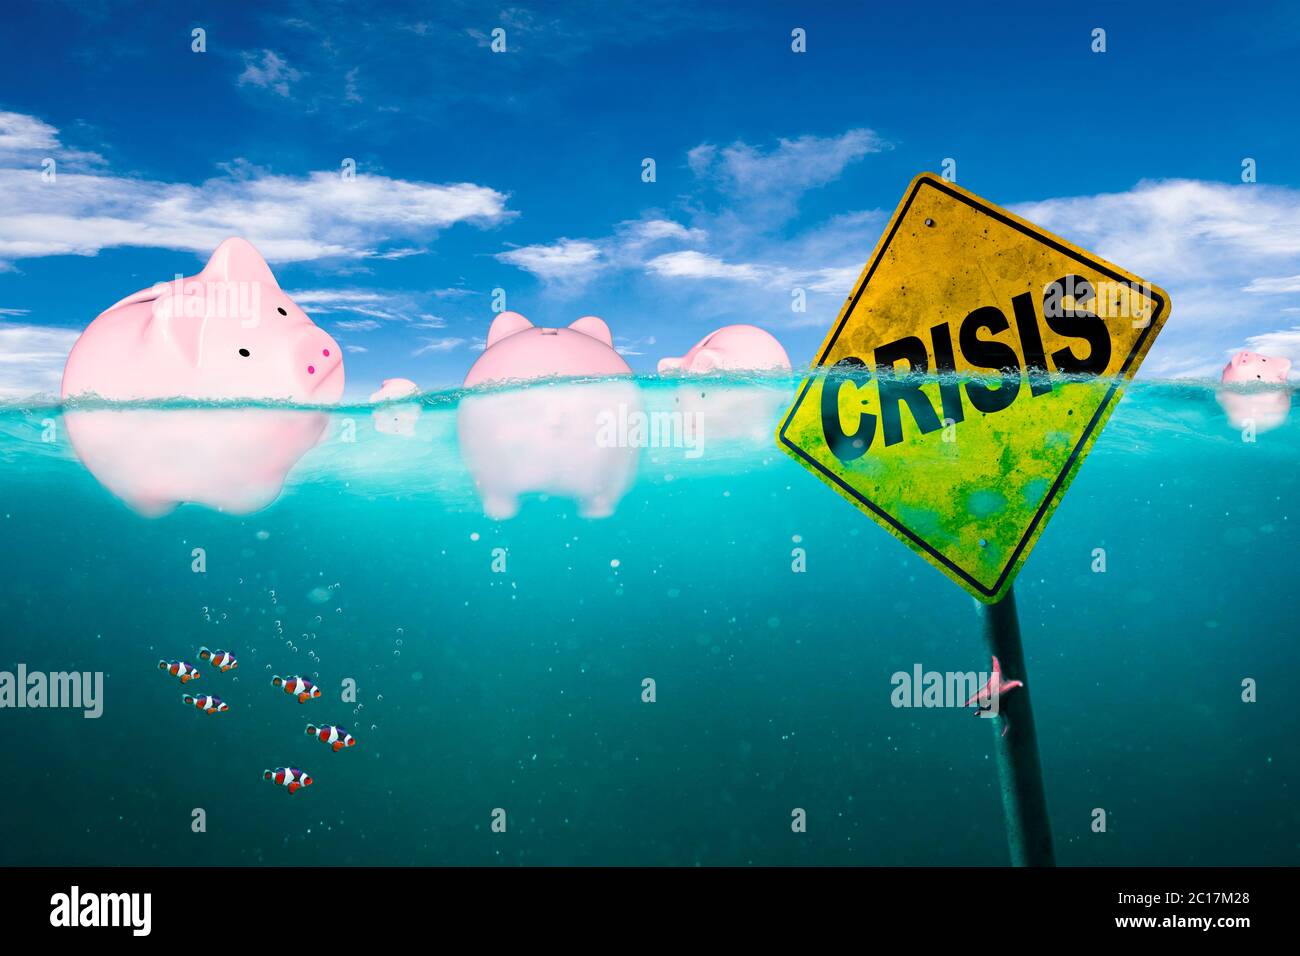 Financial troubles concept illustrated by floating pink piggy banks on dangerous waters with warning sign of economic crisis. Concept of drowning in d Stock Photo